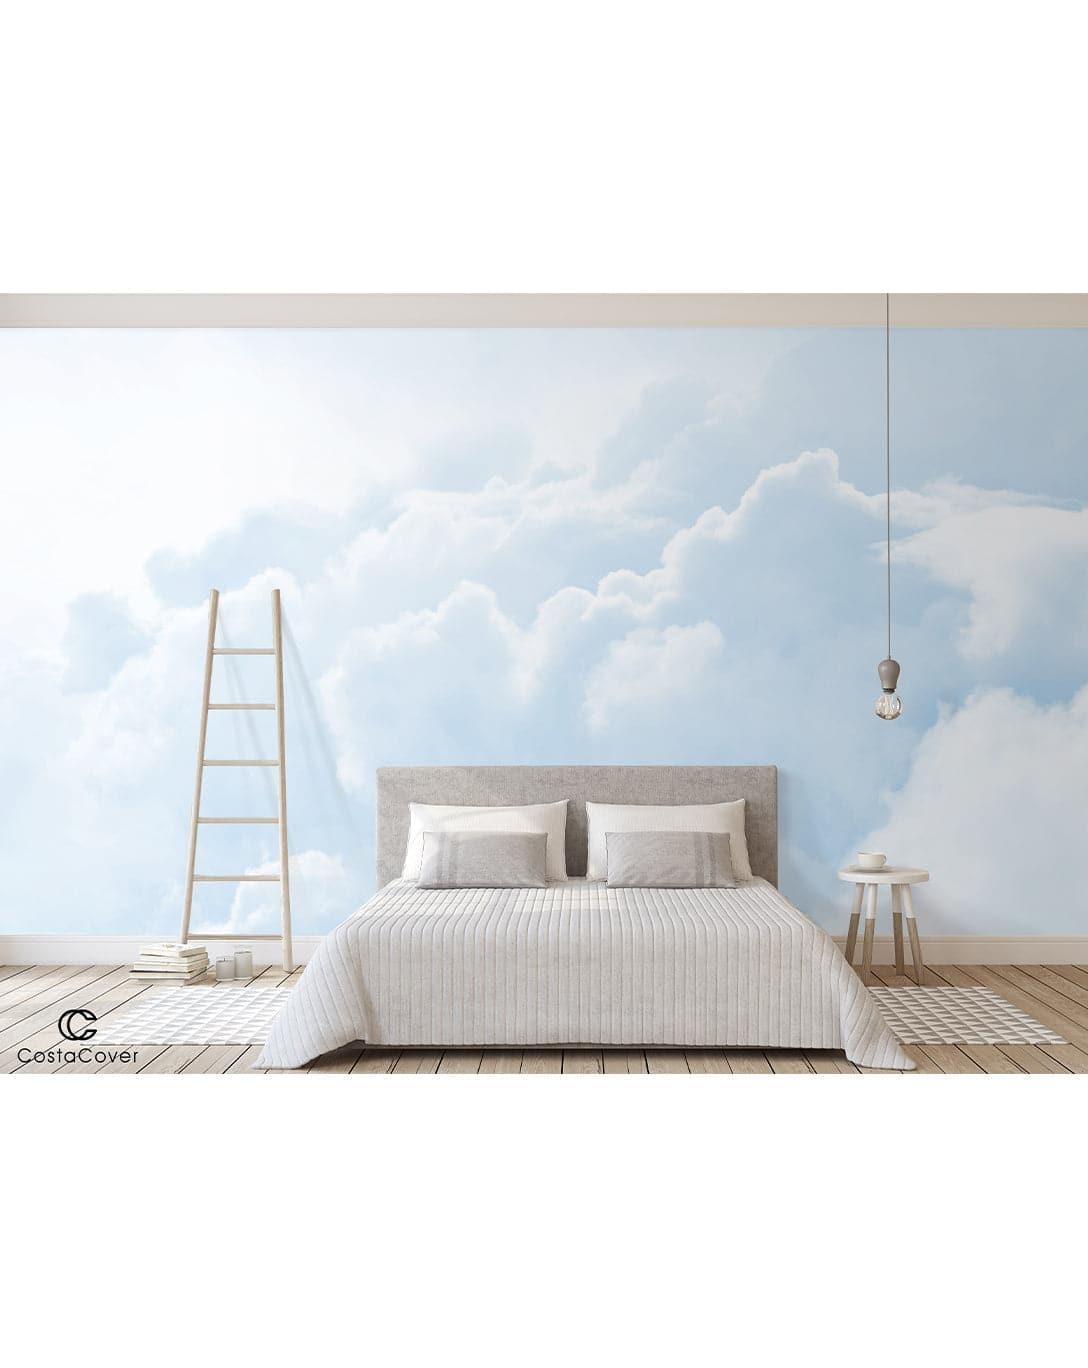 Pink Abstract Marble Stone Texture Wall Mural Pastel Blue Sky Clouds Bedroom Wall Mural Pastel Blue Sky Clouds Bedroom Wall Mural 